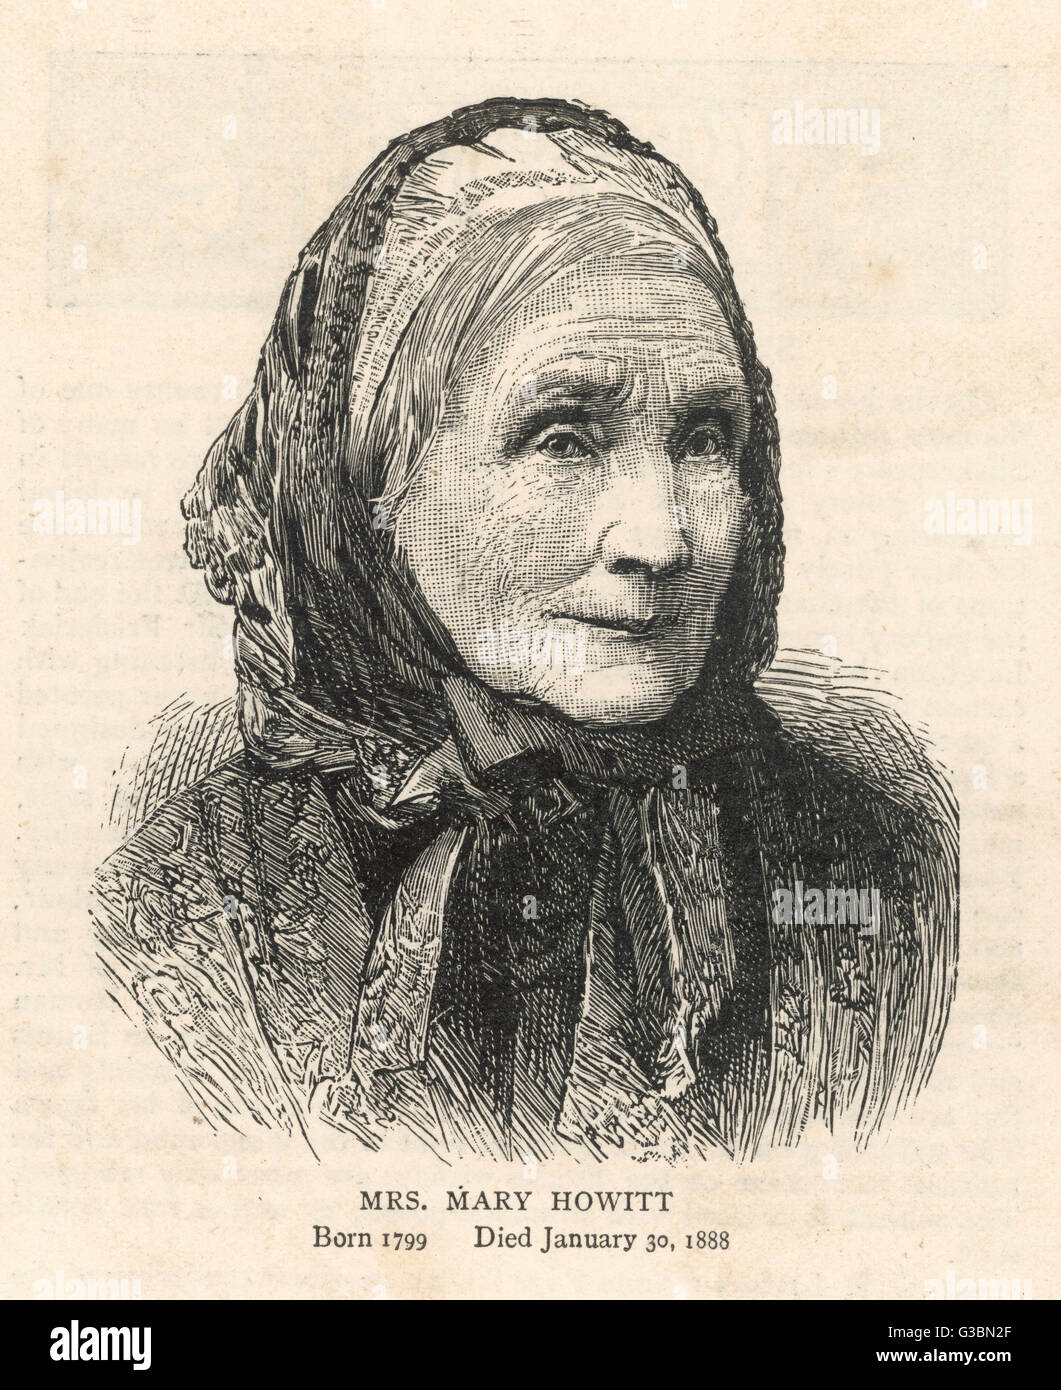 MARY HOWITT Writer, wife of William Howitt in old age        Date: 1799 - 1888 Stock Photo